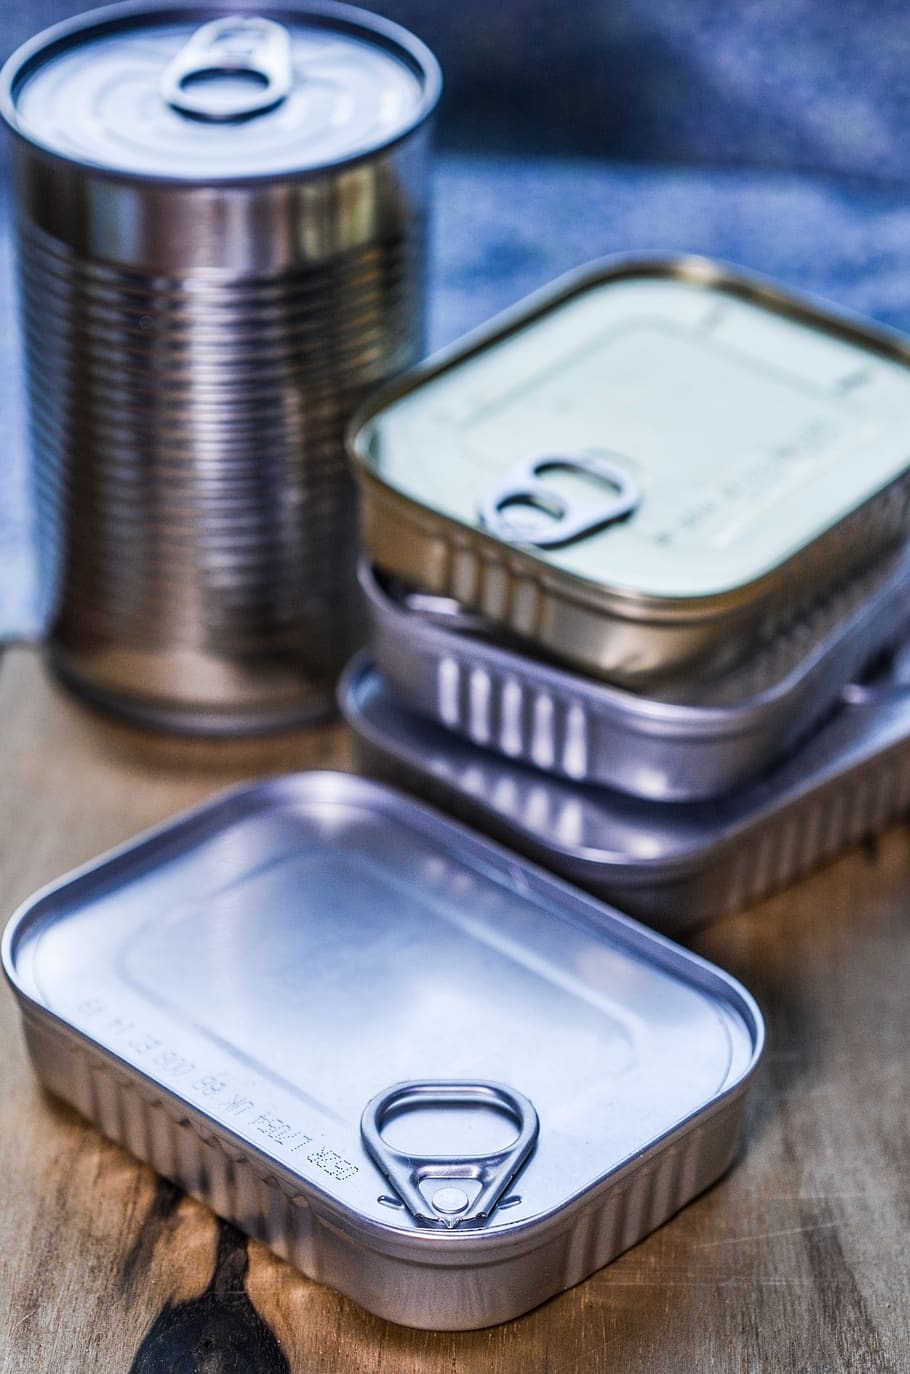 can, kitchen, product, wooden, canned, container, metal, shiny